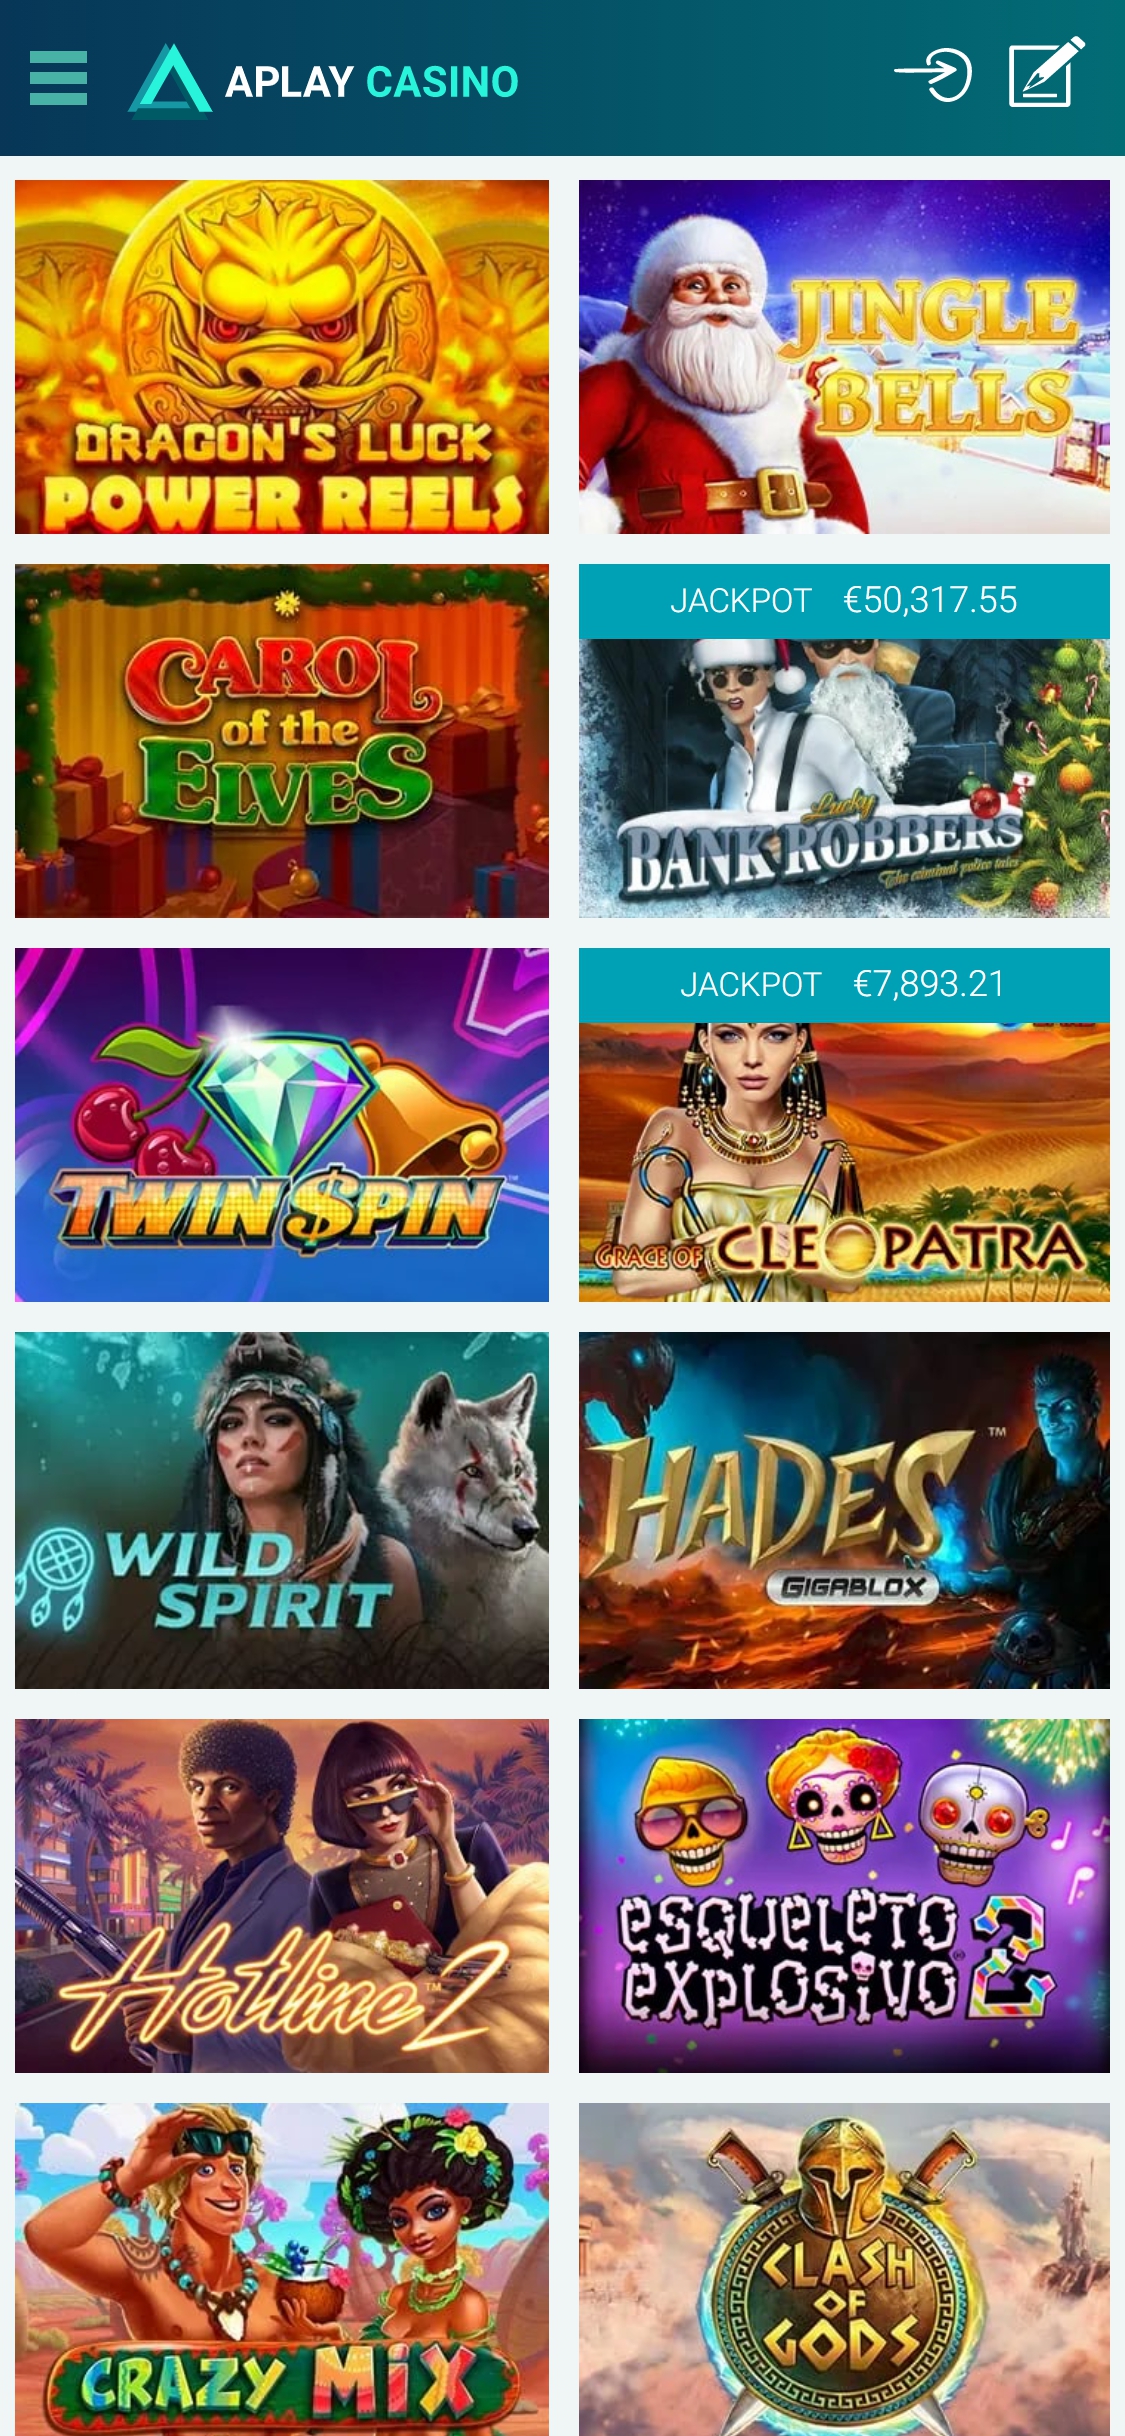 Aplay Casino Mobile Games Review